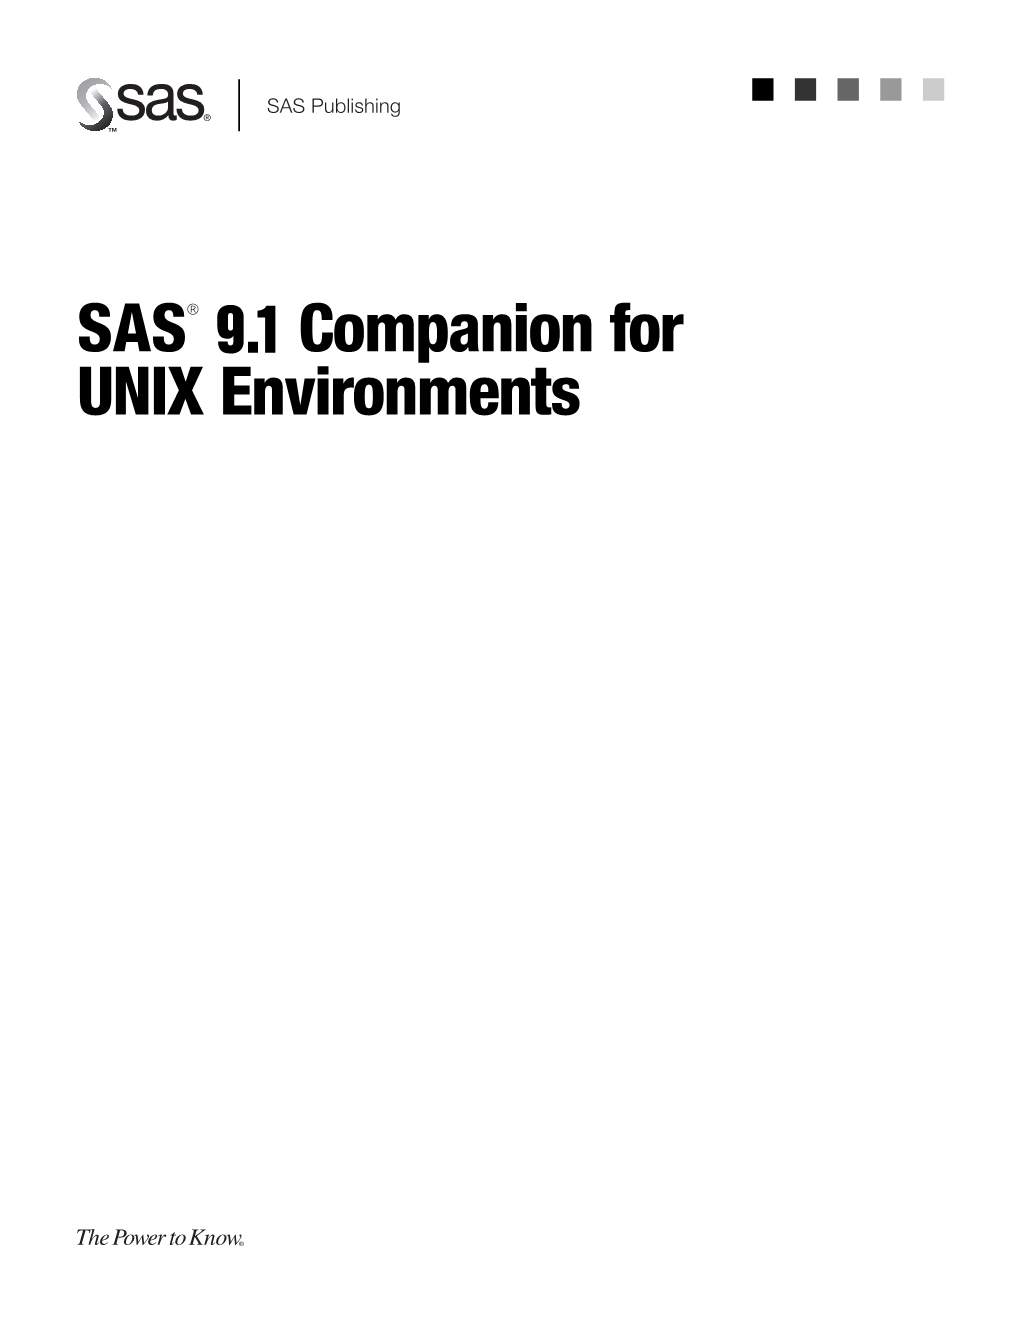 SAS® 9.1 Companion for UNIX Environments the Correct Bibliographic Citation for This Manual Is As Follows: SAS Institute Inc